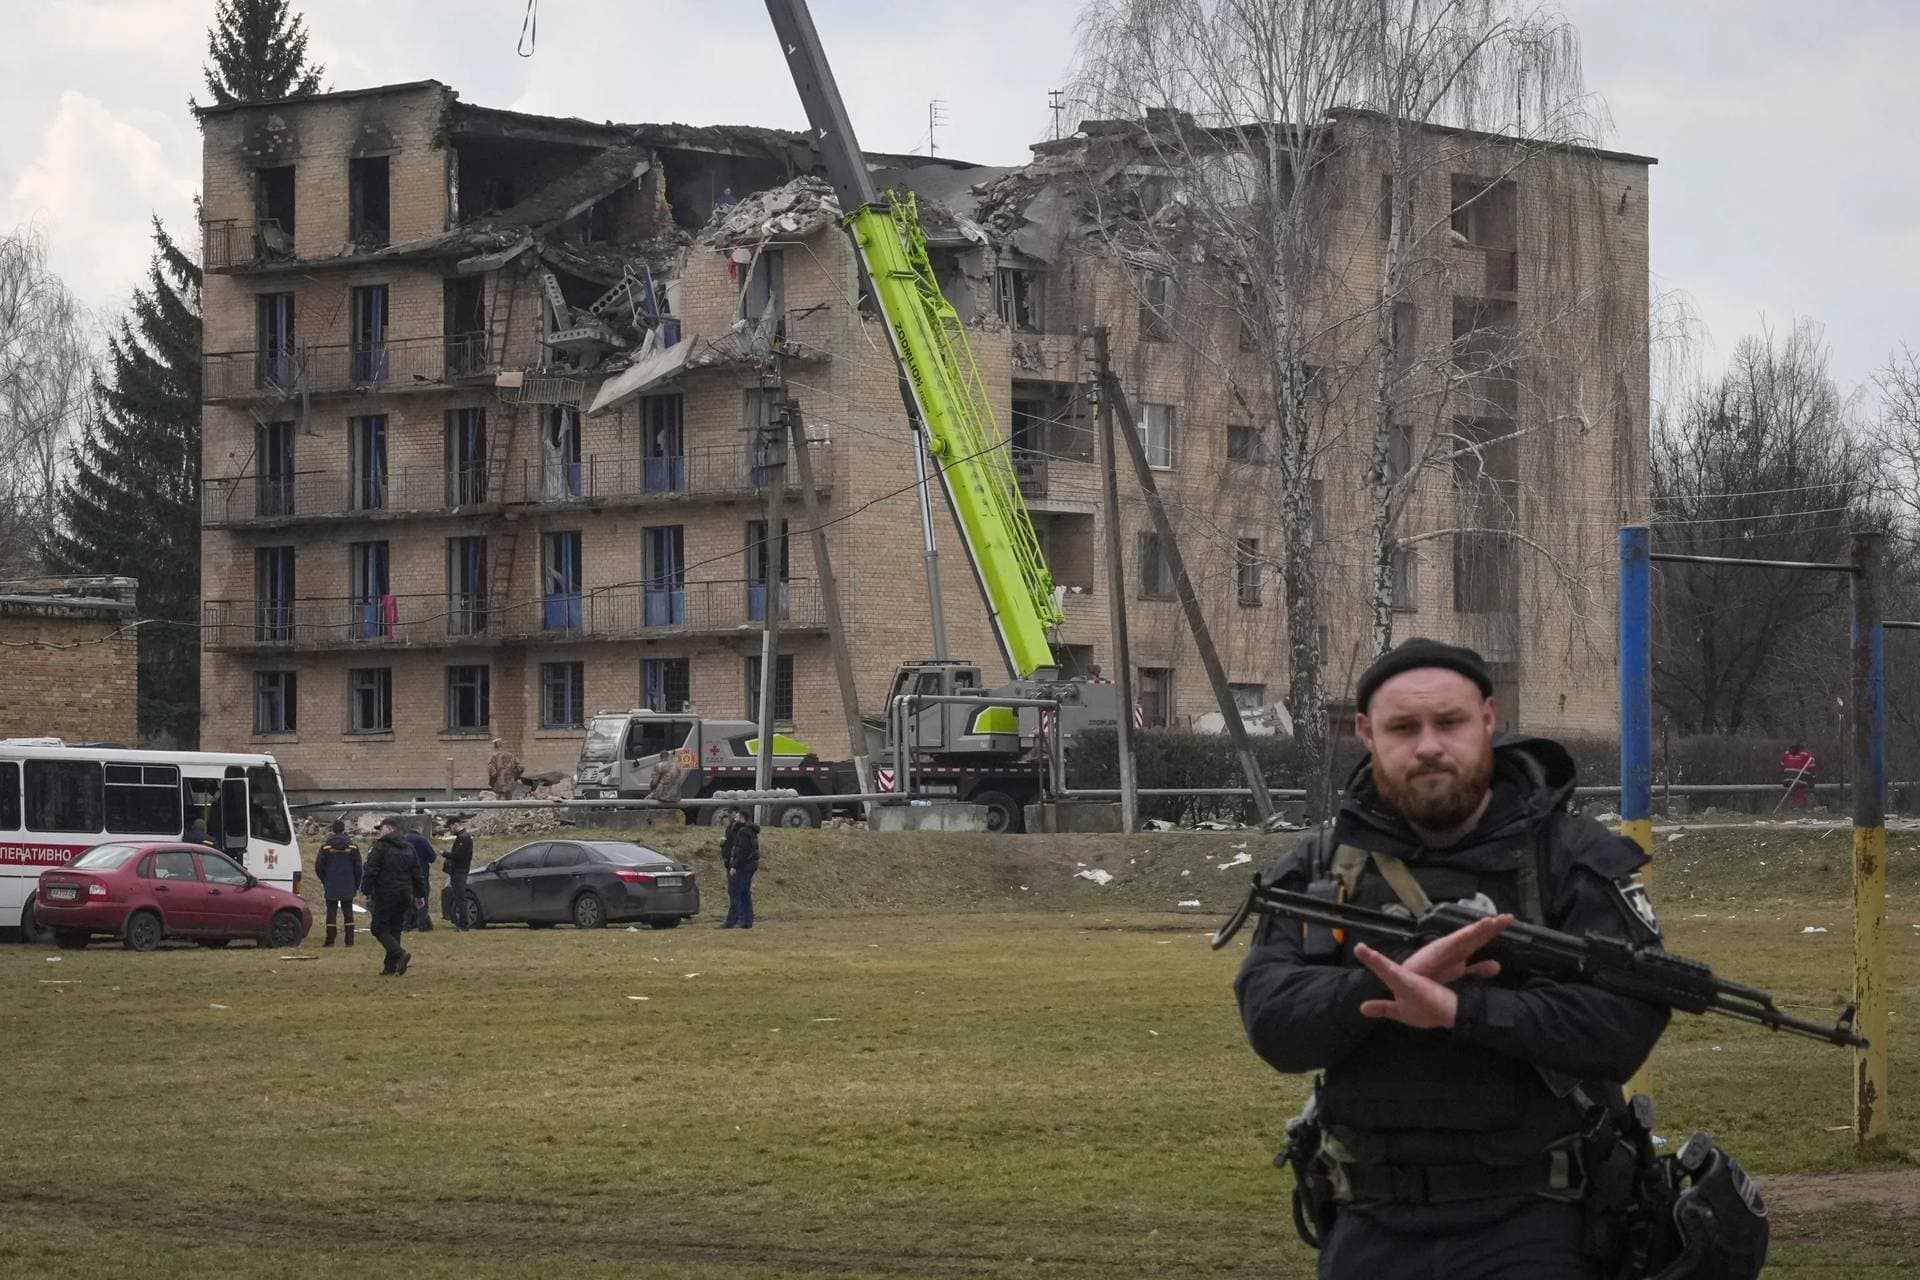 A police officer gestures to prevent photographing at the scene of a drone attack in the town of Rzhyshchiv